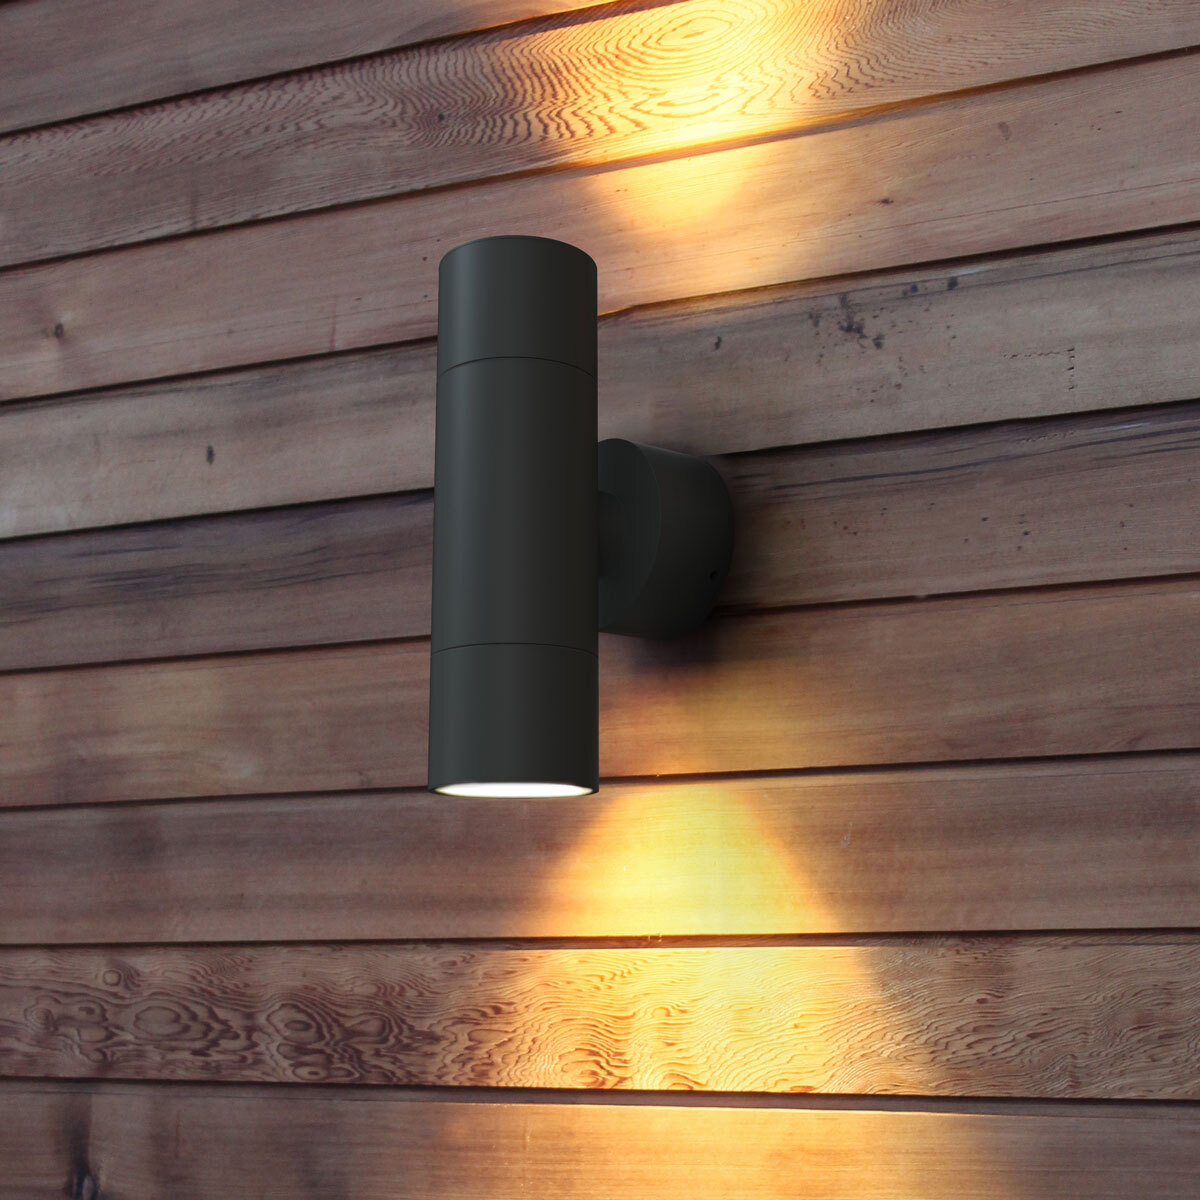 Lifestyle image of light on wooden wall